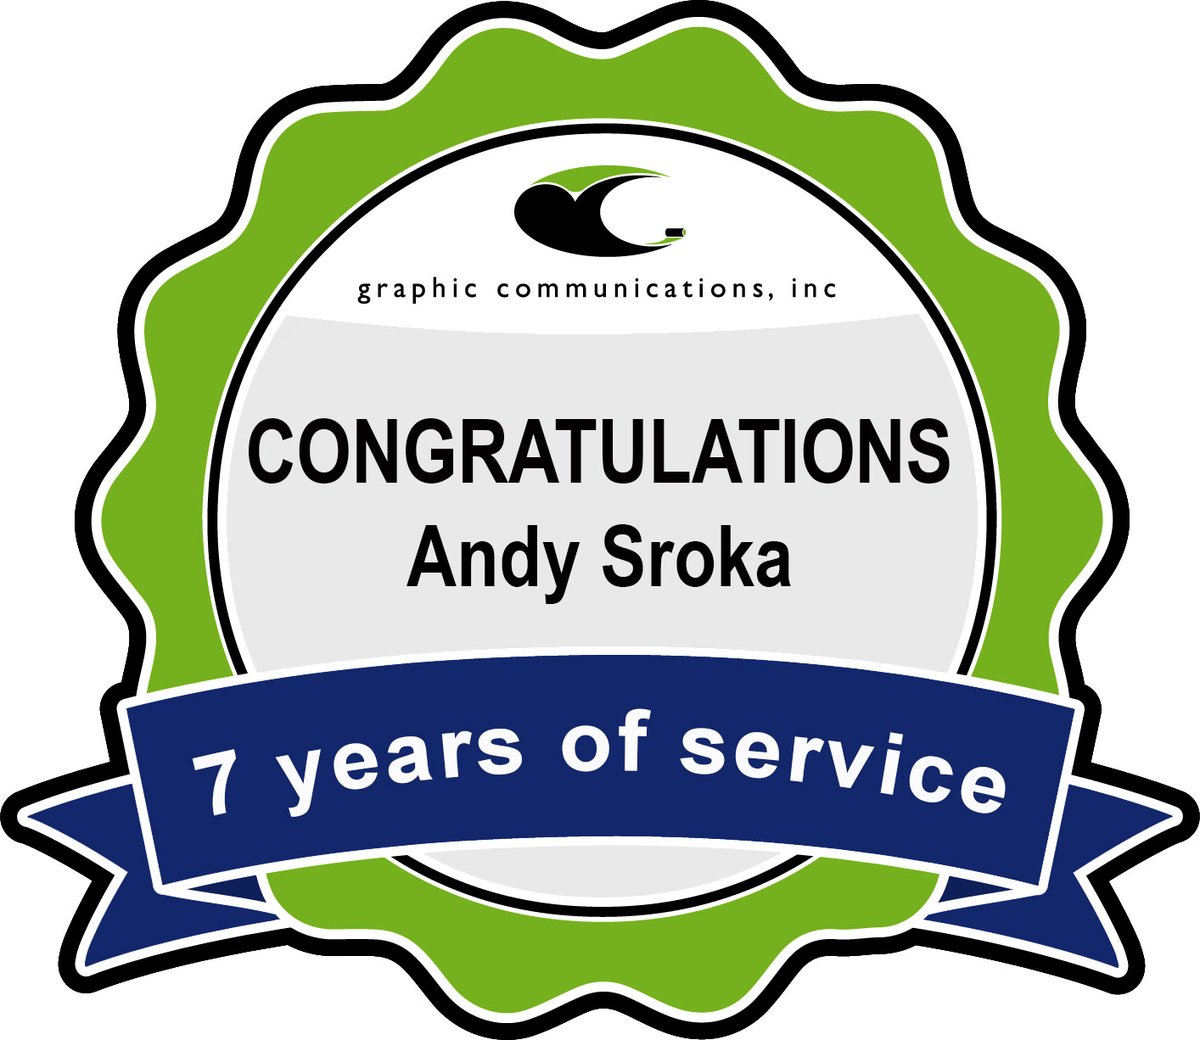 Congratulations to Andy Sroka for 7 years of service to GCI! Thank you for all that you do!
#labels #labelprinting